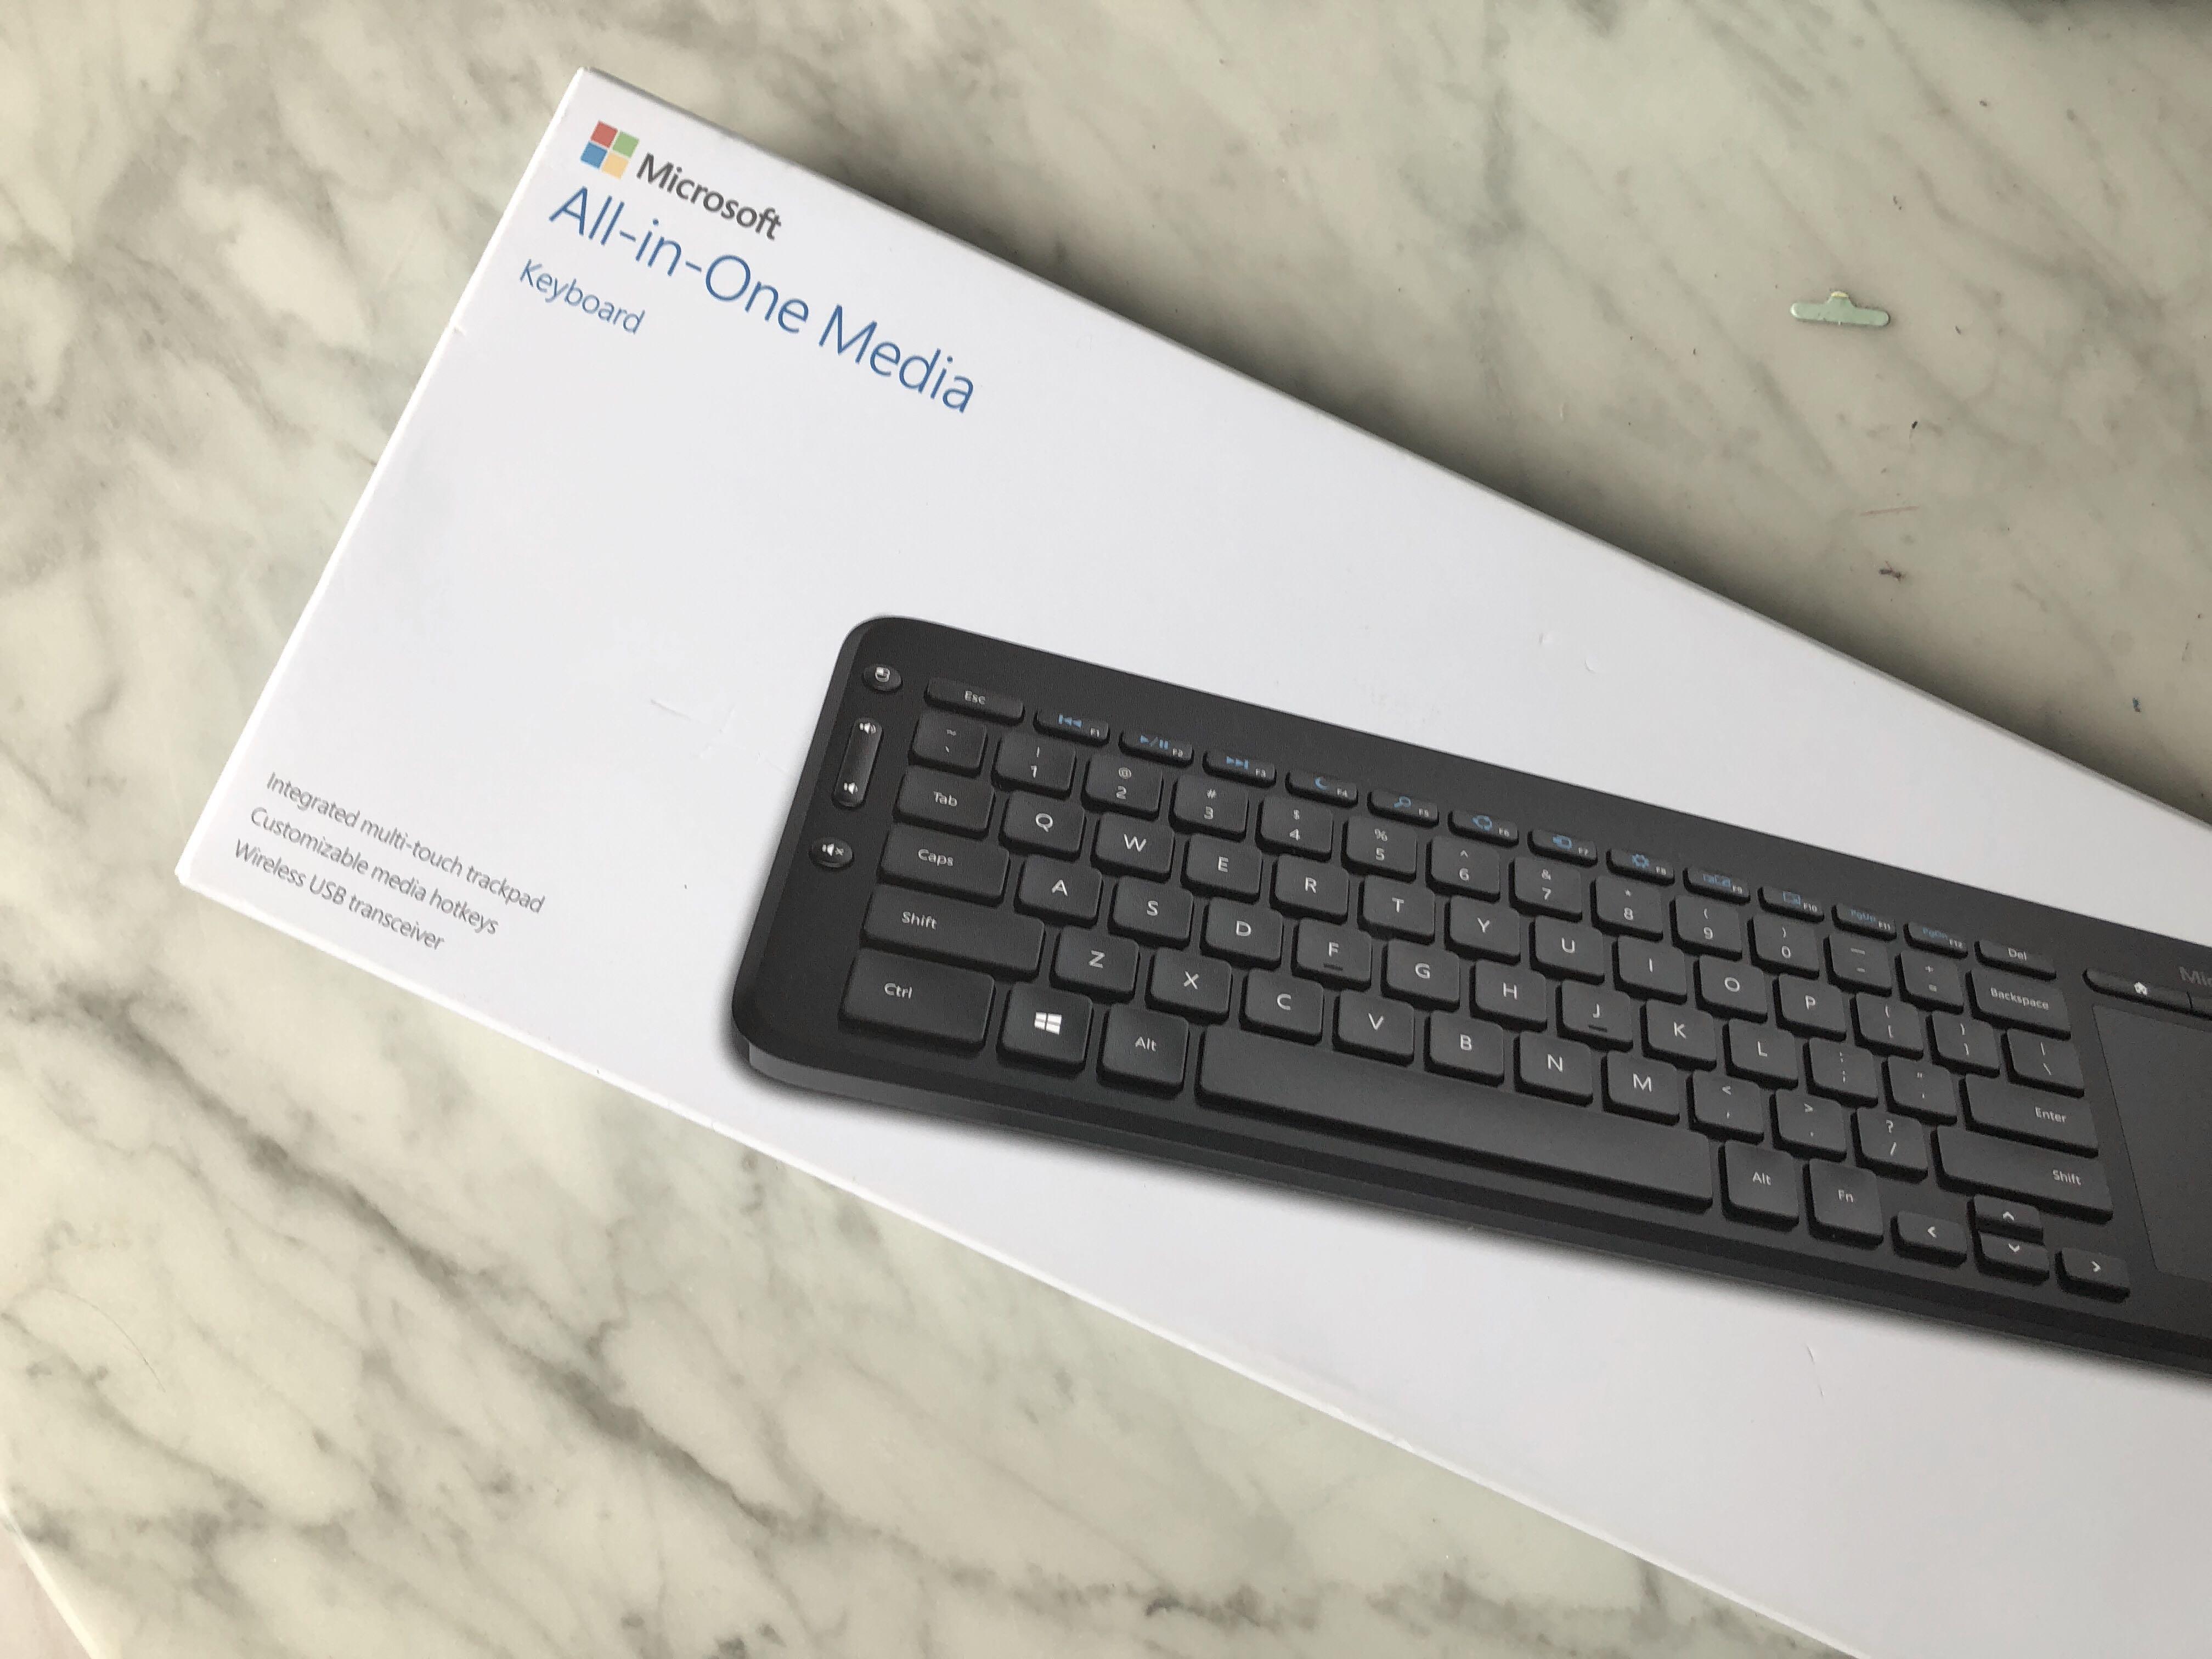 Microsoft All In One Media Keyboard Bnib Electronics Computer Parts Accessories On Carousell